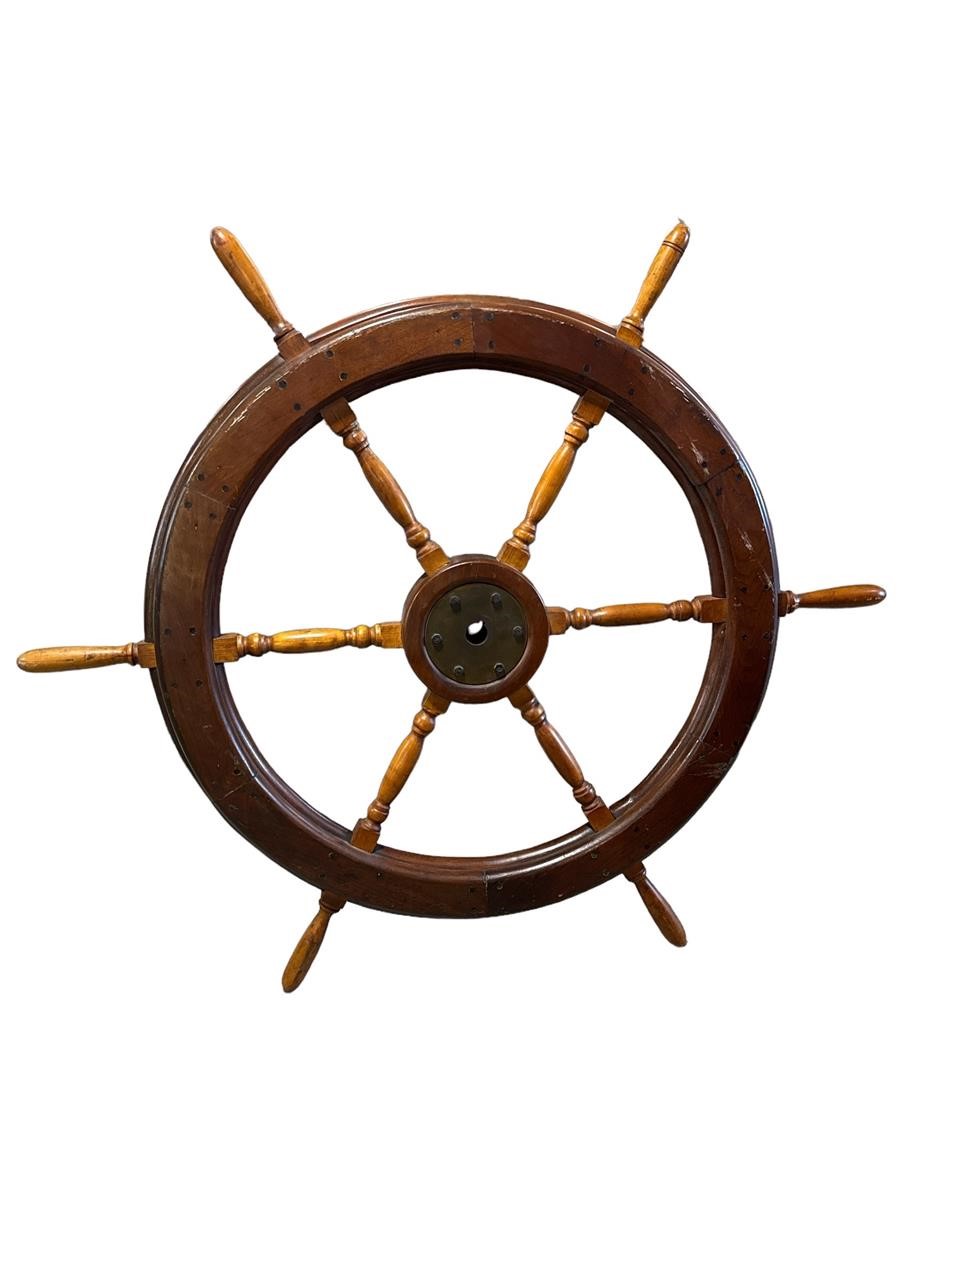 48 INCH WOOD AND BRASS SHIPS PILOT WHEEL